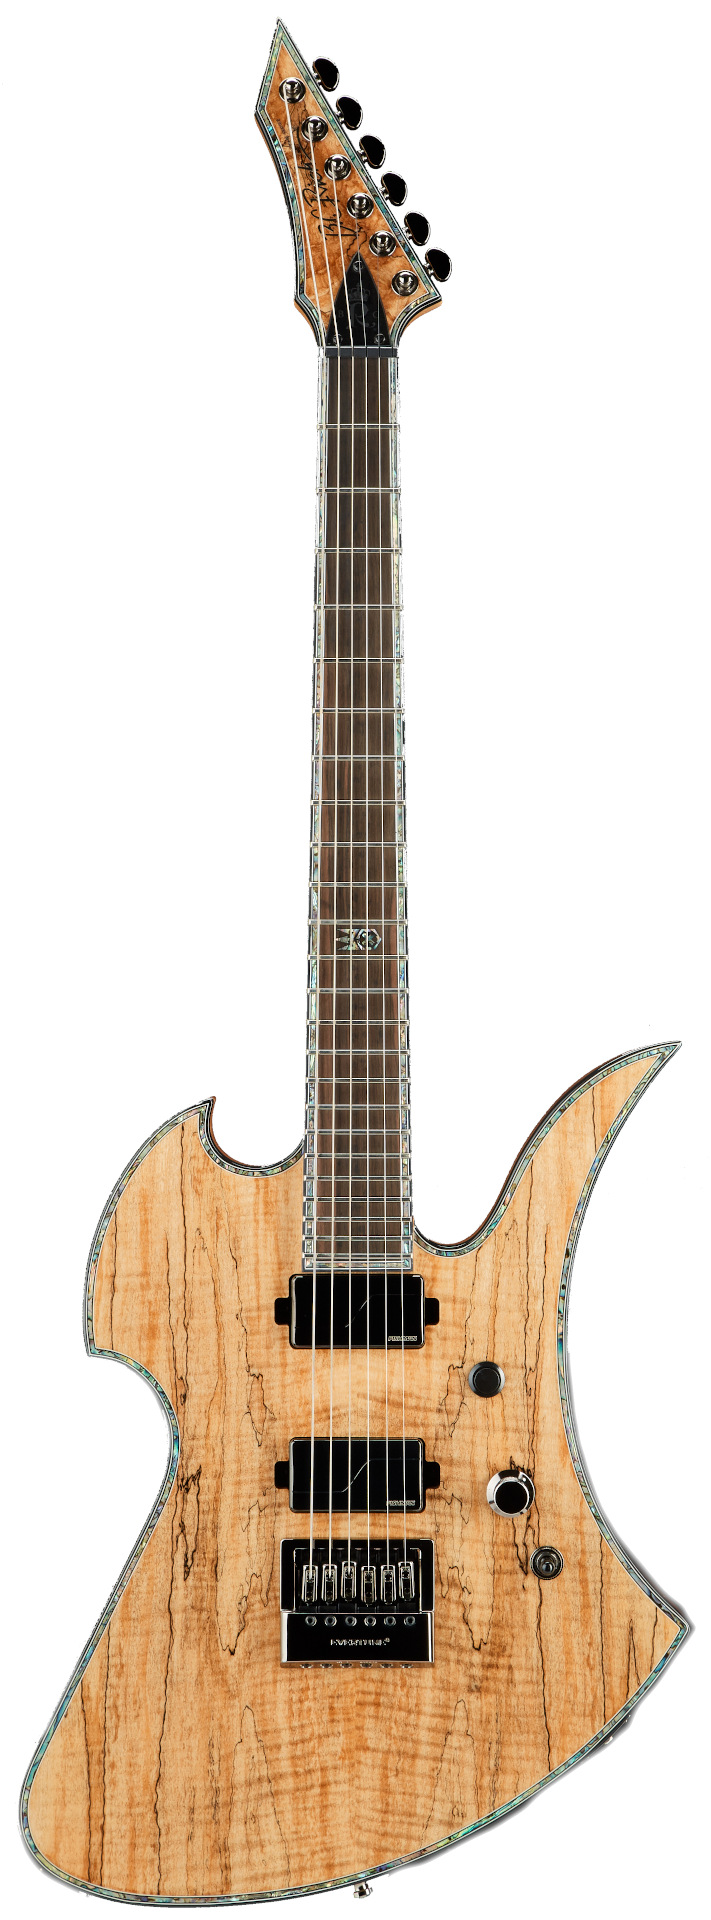 B.C. Rich Mockingbird Extreme Exotic with Evertune Bridge - Spalted Maple Top, Natural Transparent